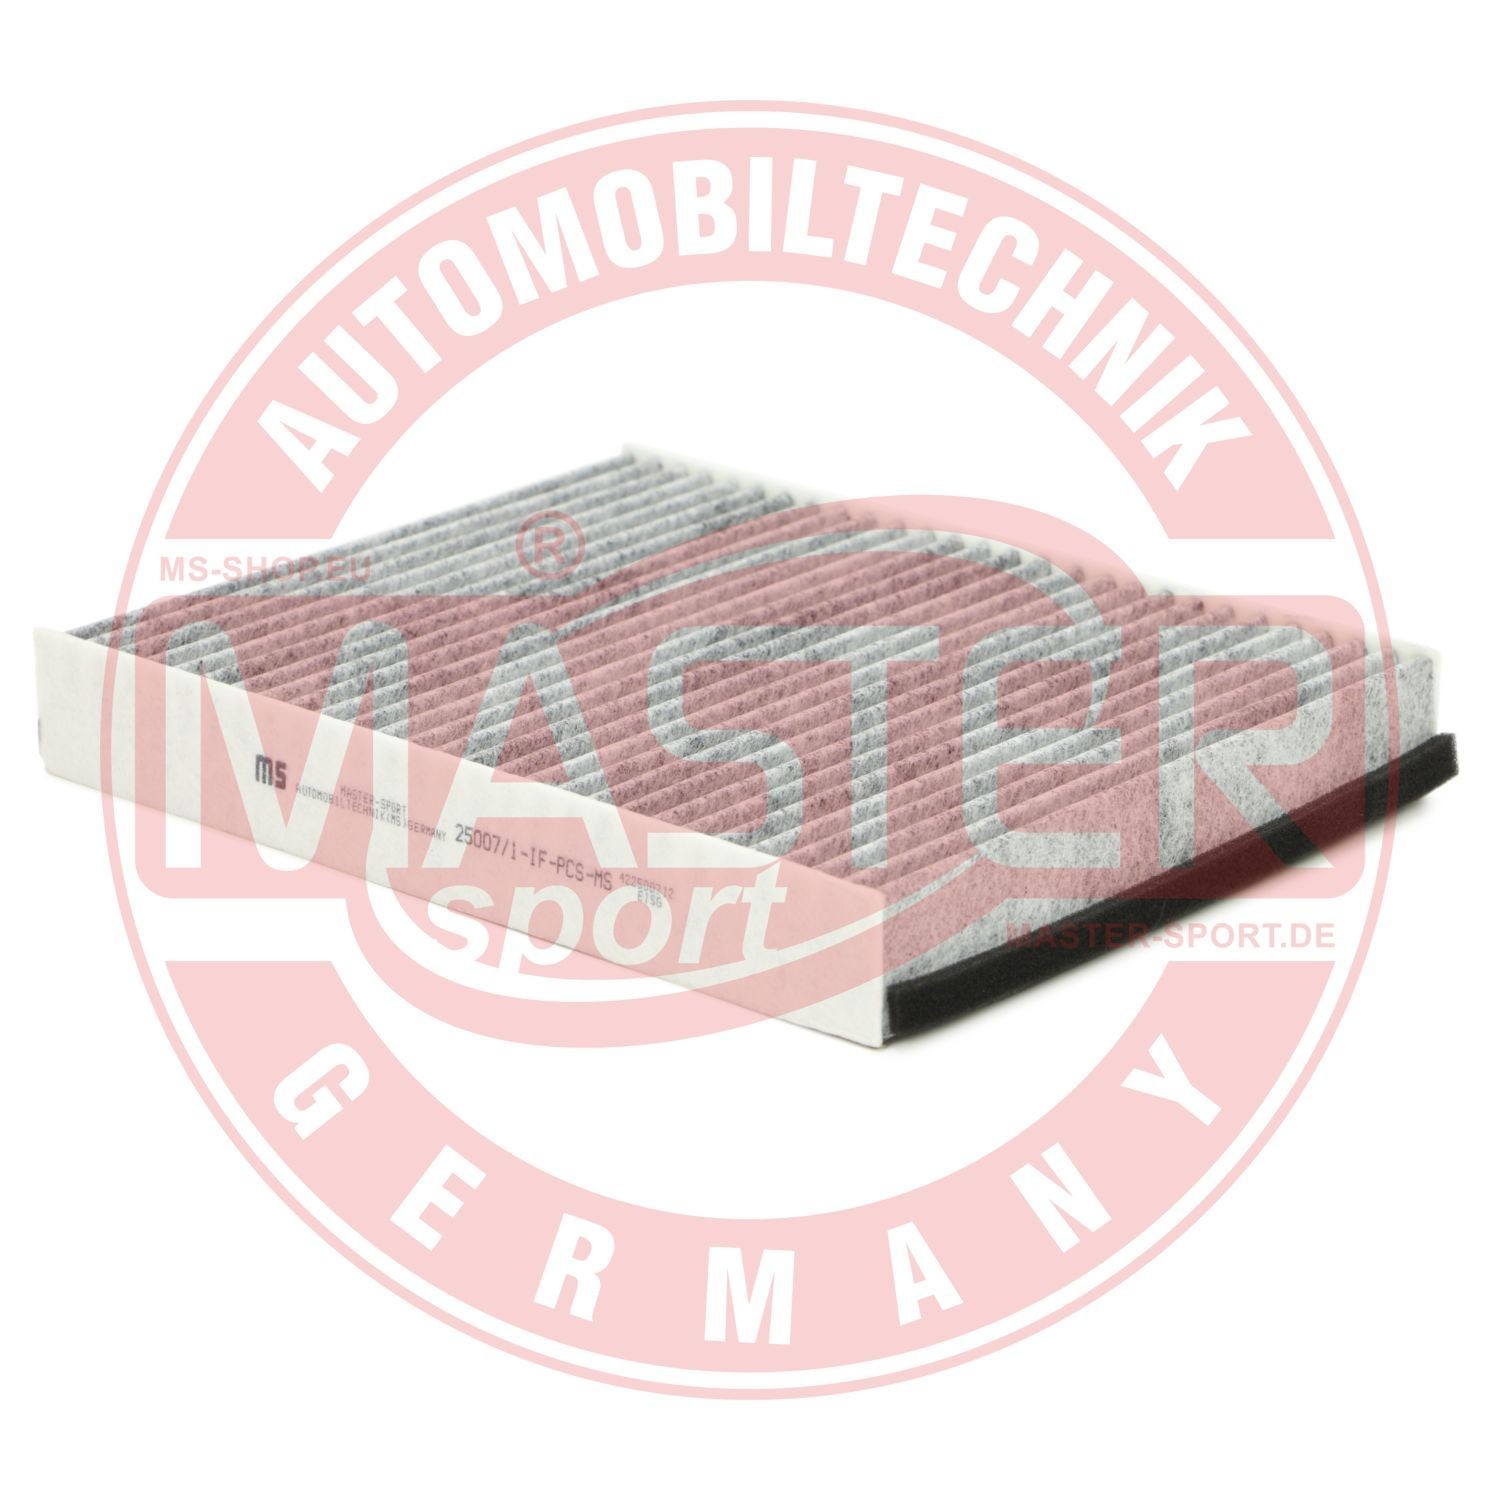 Original MASTER-SPORT 420250072 Cabin air filter 25007/1-IF-PCS-MS for FORD MONDEO